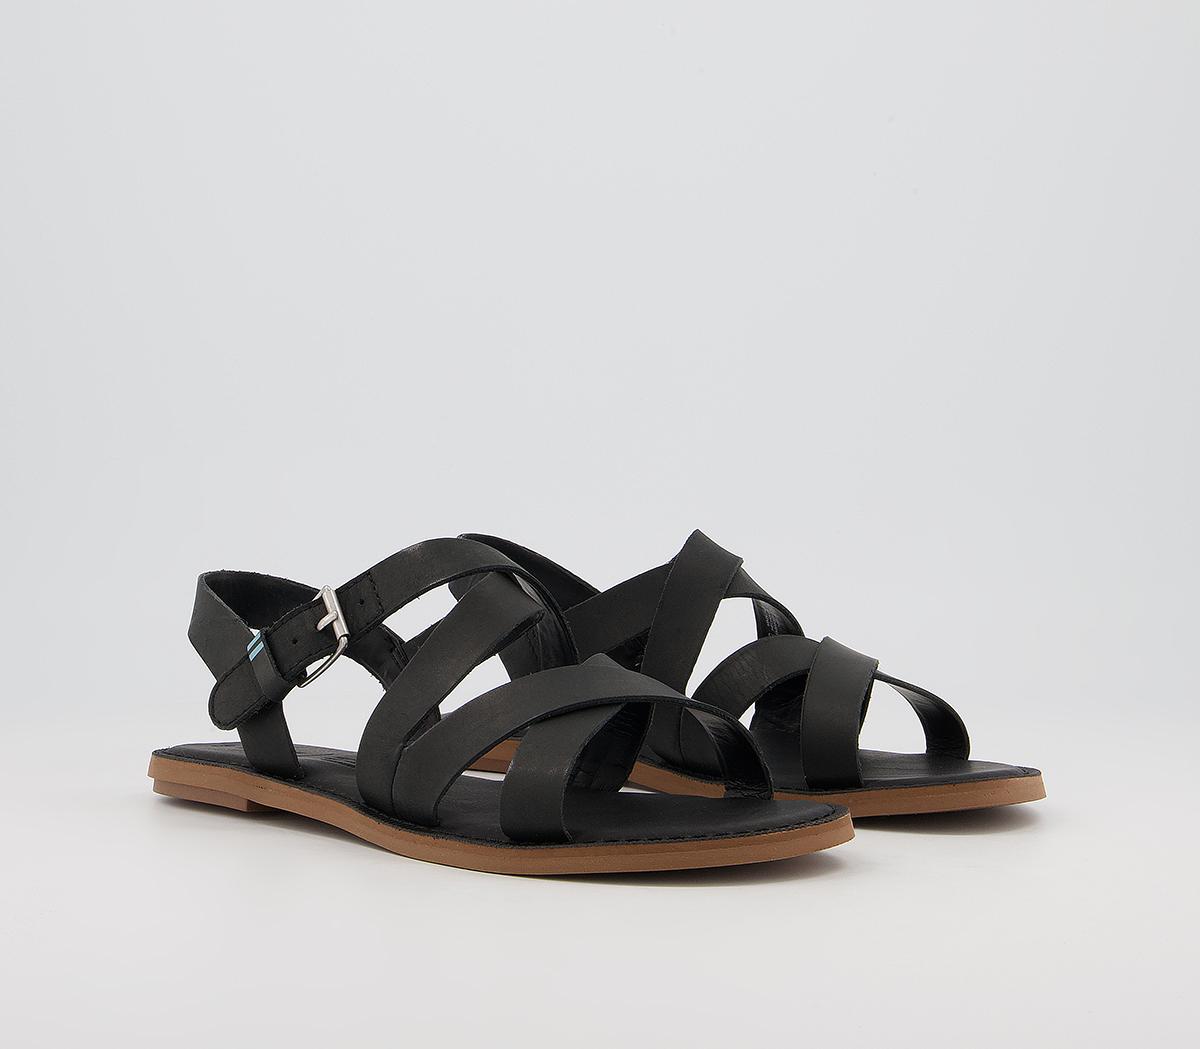 TOMS Womens Sicily Sandals Black Leather, 6